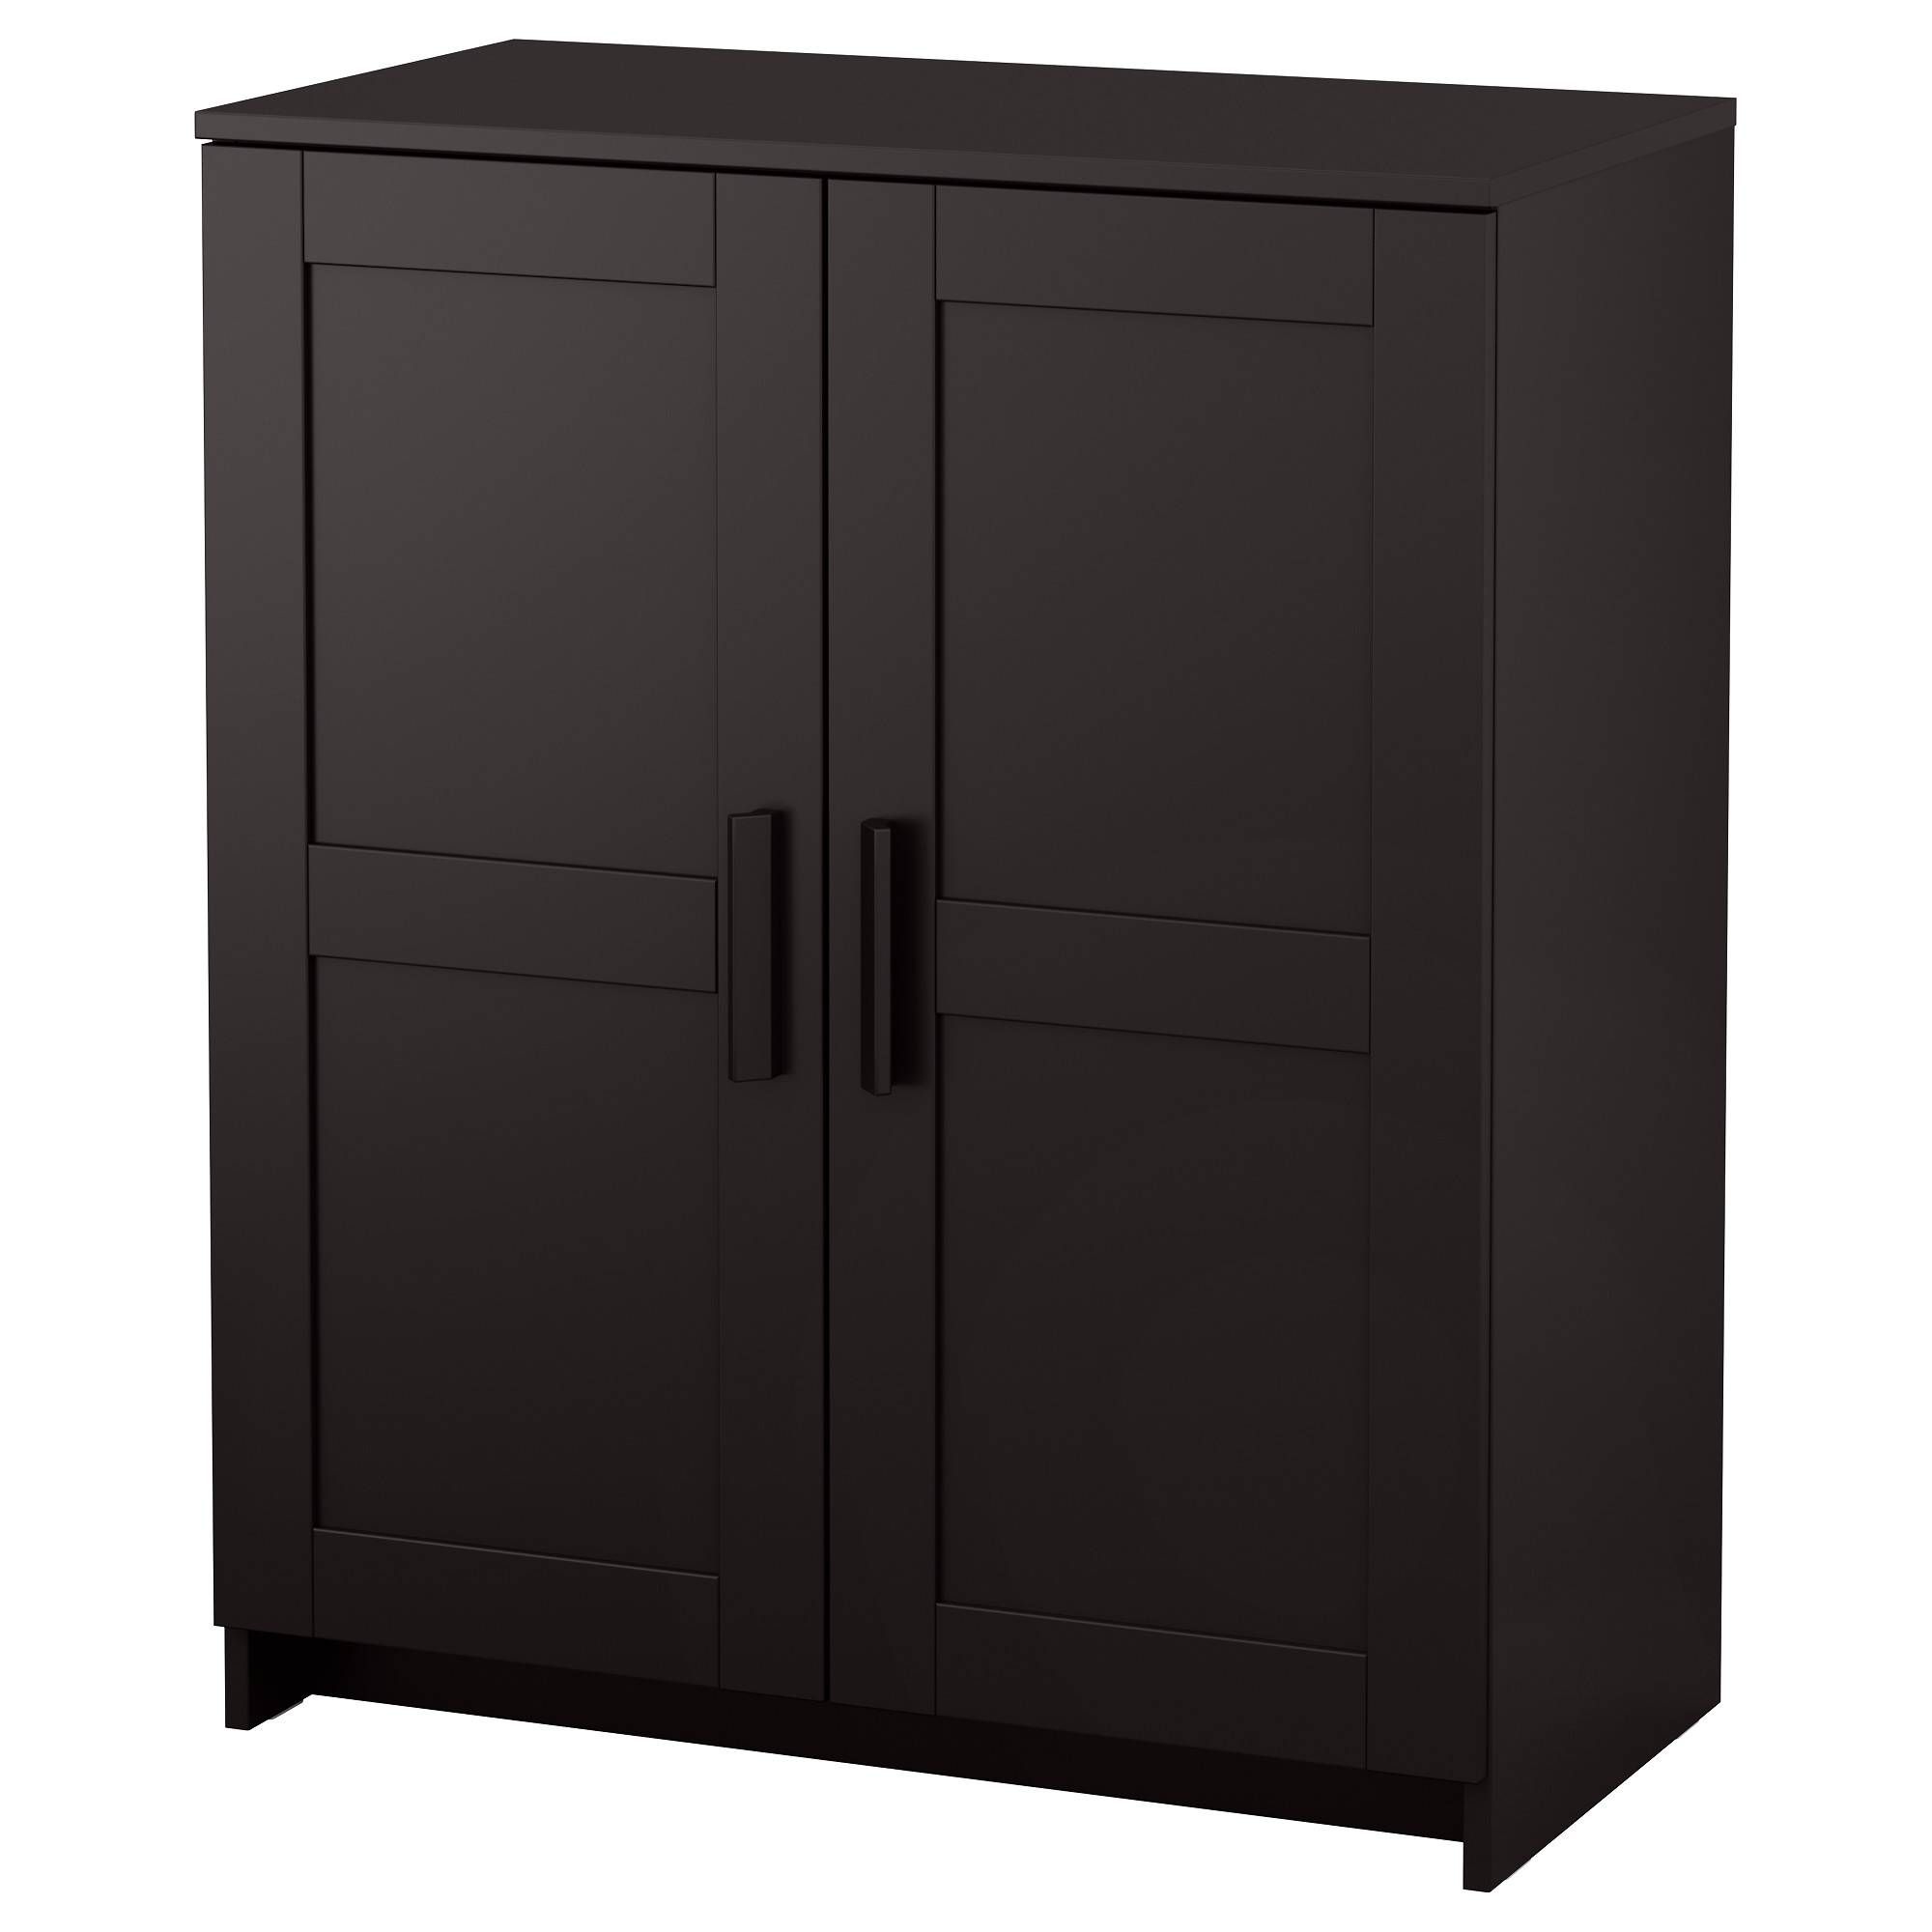 Cabinets & Sideboards – Ikea Inside Sideboards With Glass Doors And Drawers (View 13 of 15)